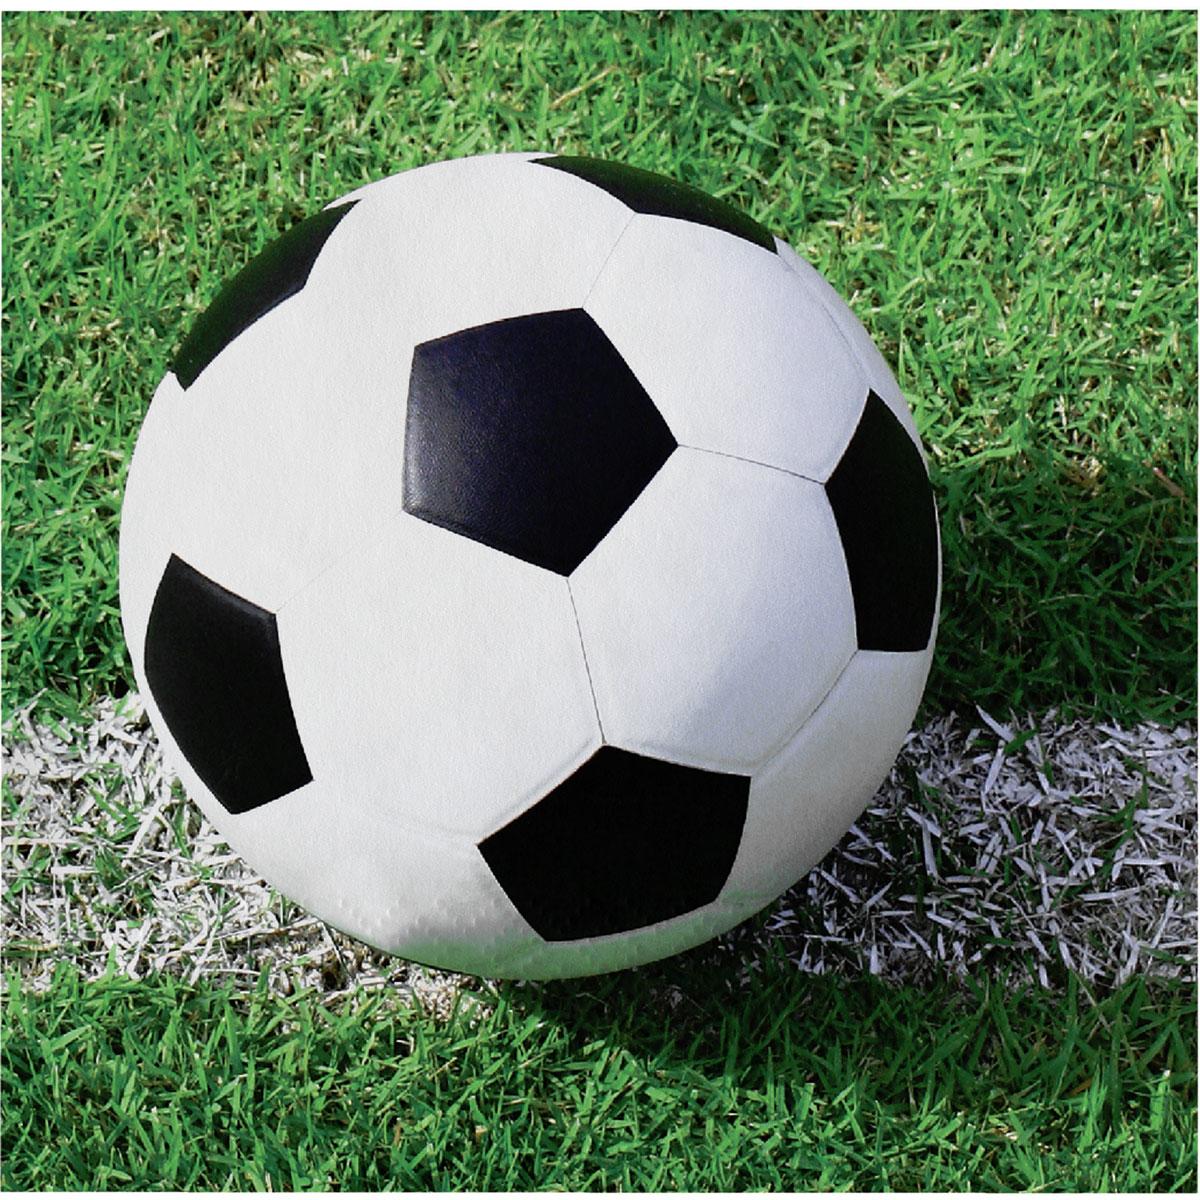 Football Beverage Napkins - 18x 2Ply by Creative Party 657966 available from the entire collection here at Karnival Costumes online party shop